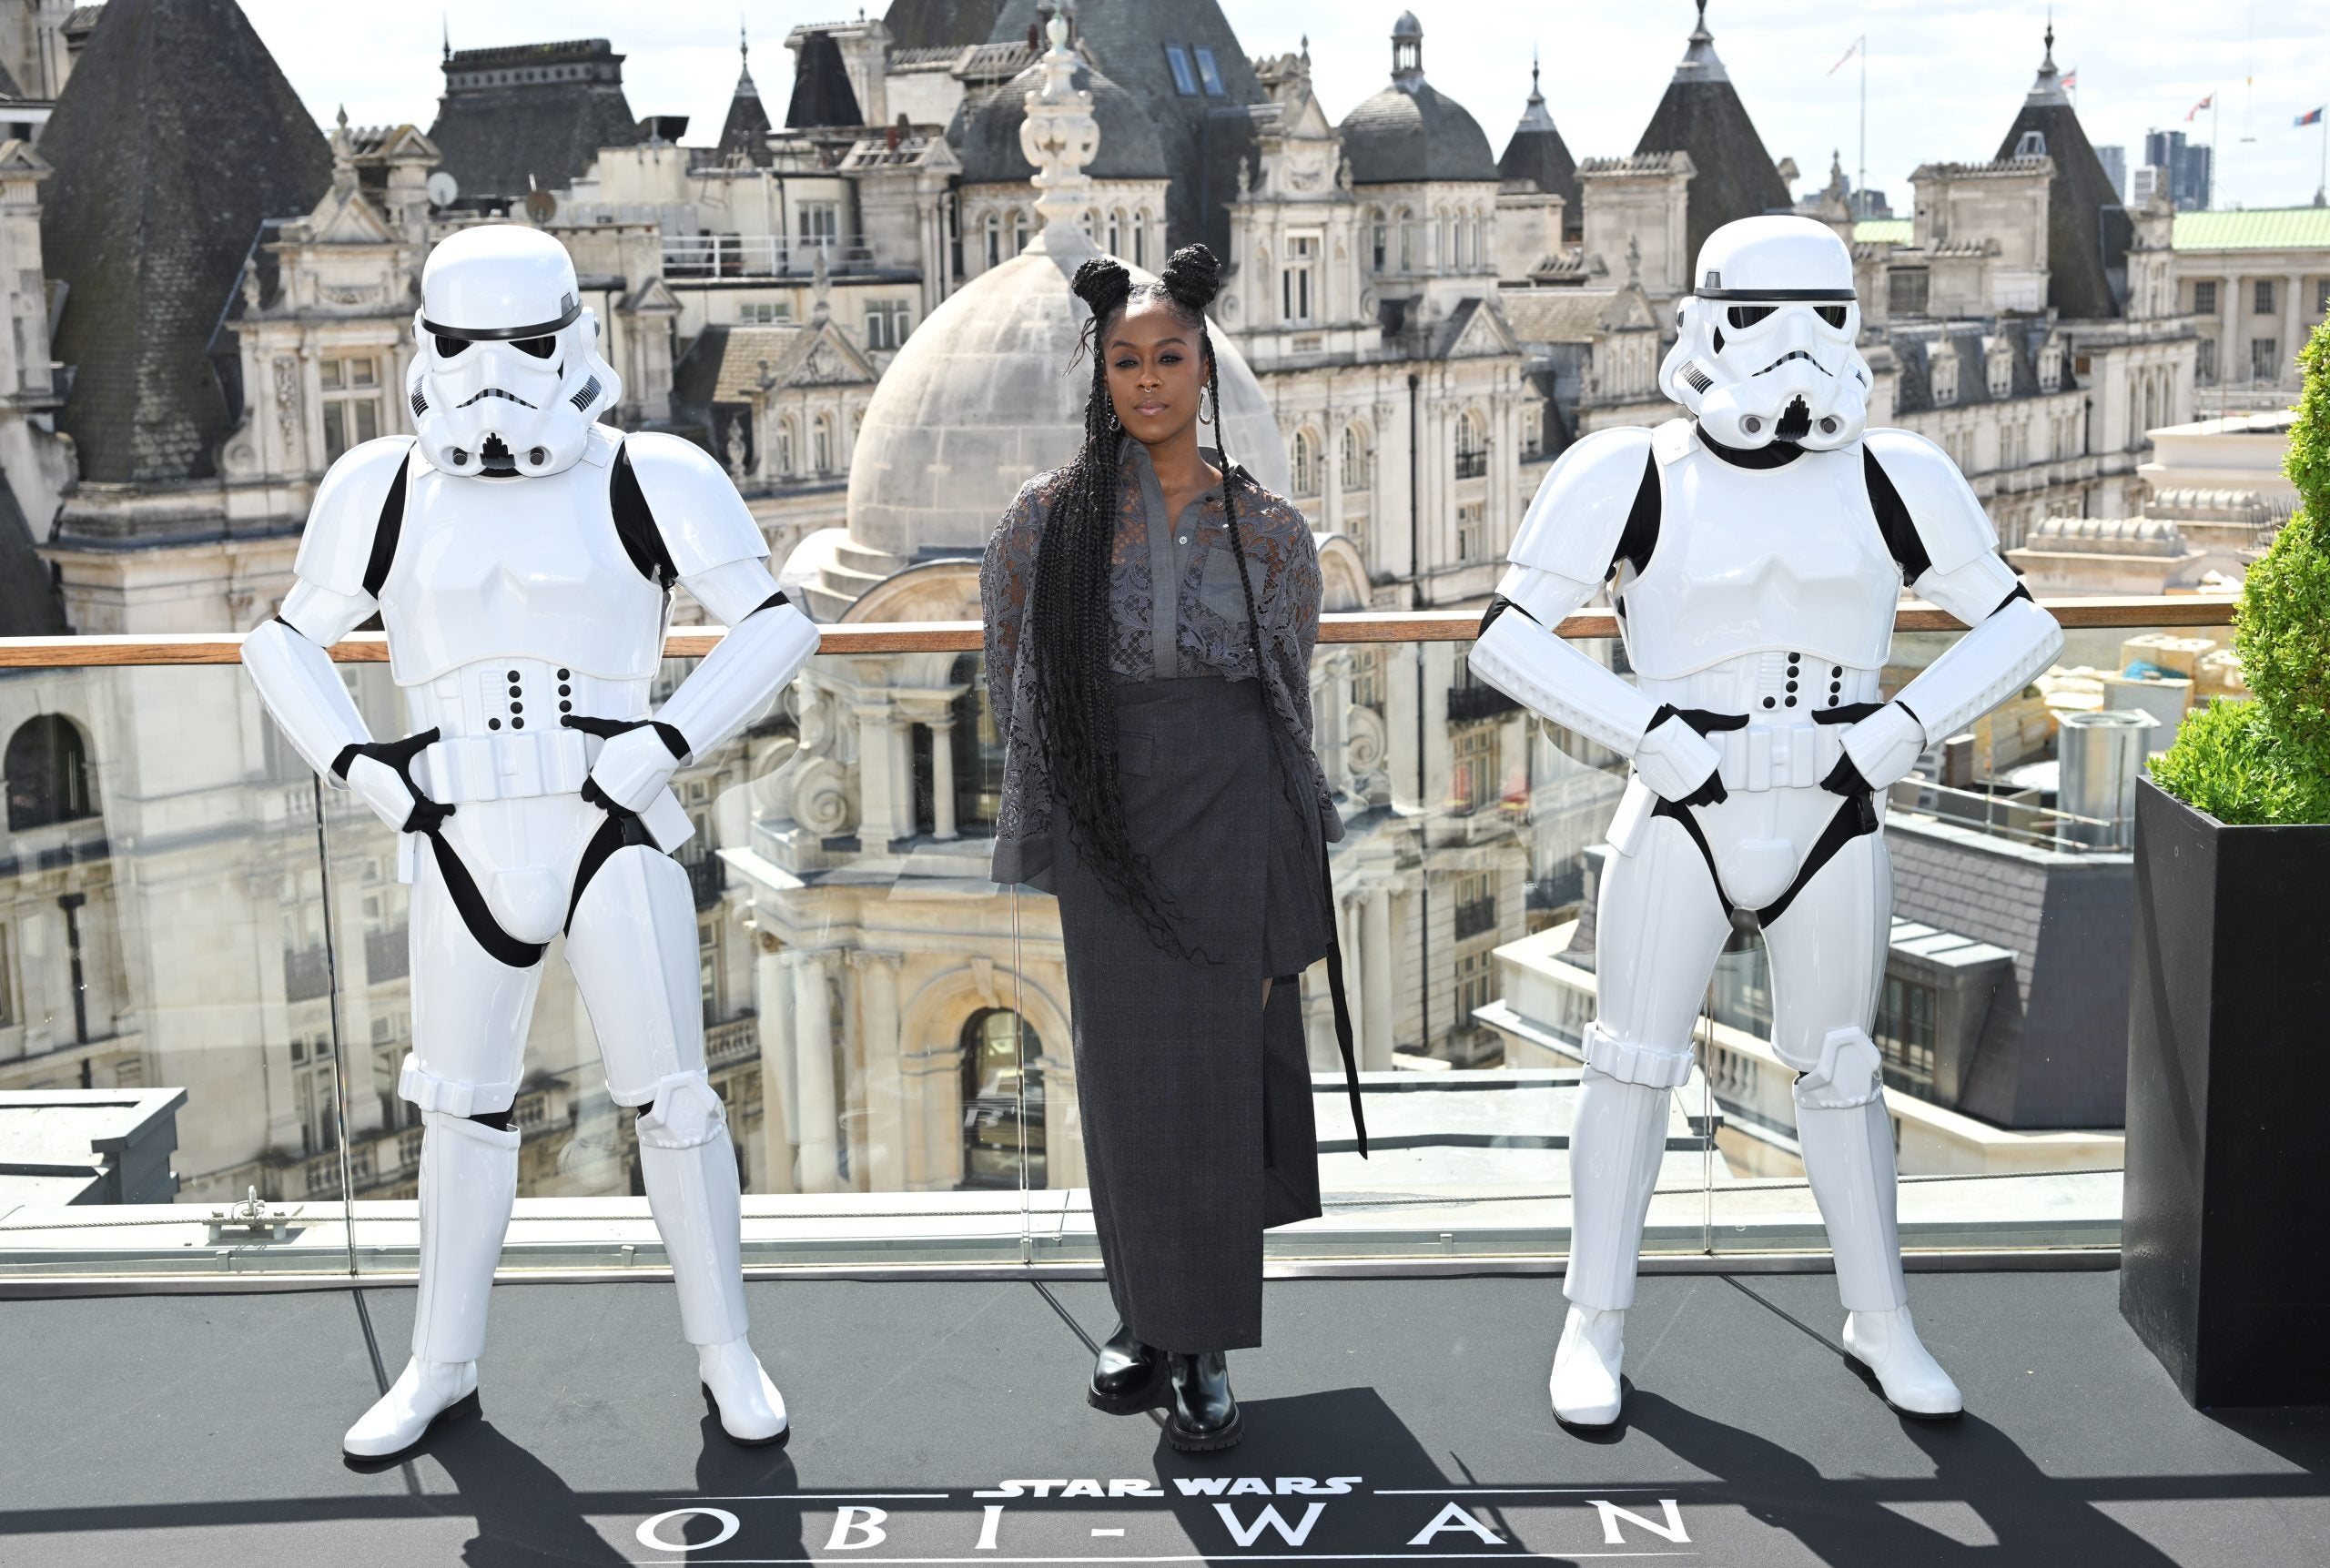 Moses Ingram, Disney Stand Up To Racist Star Wars Fans - xoNecole